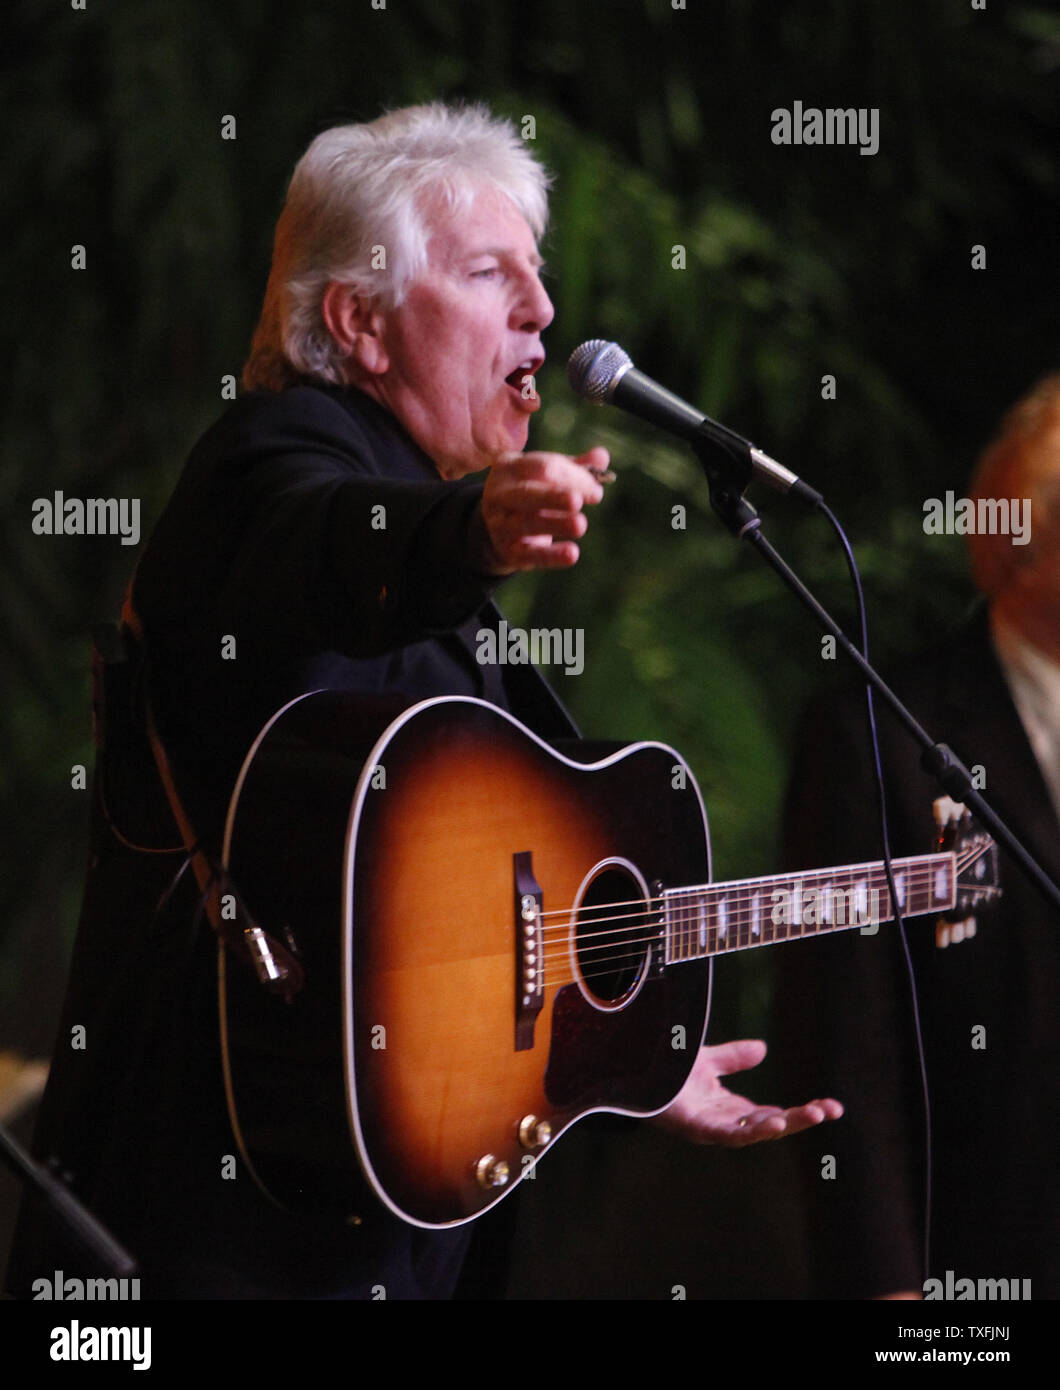 Graham Nash performs during a tribute concert memorializing Buddy Holly, J.P. 'The Big Booper' Richardson and Ritchie Valens at the Surf Ballroom in Clear Lake, Iowa on February 2, 2009. The three rock 'n' roll pioneers played their last show at the Surf Ballroom 50 years ago to the day. Singer Don McLean coined the phrase 'the day the music died' in his hit song American Pie referring to the death of the plane crash that killed the three stars in the early morning hours of February 3, 1959.  (UPI Photo/Brian Kersey) Stock Photo